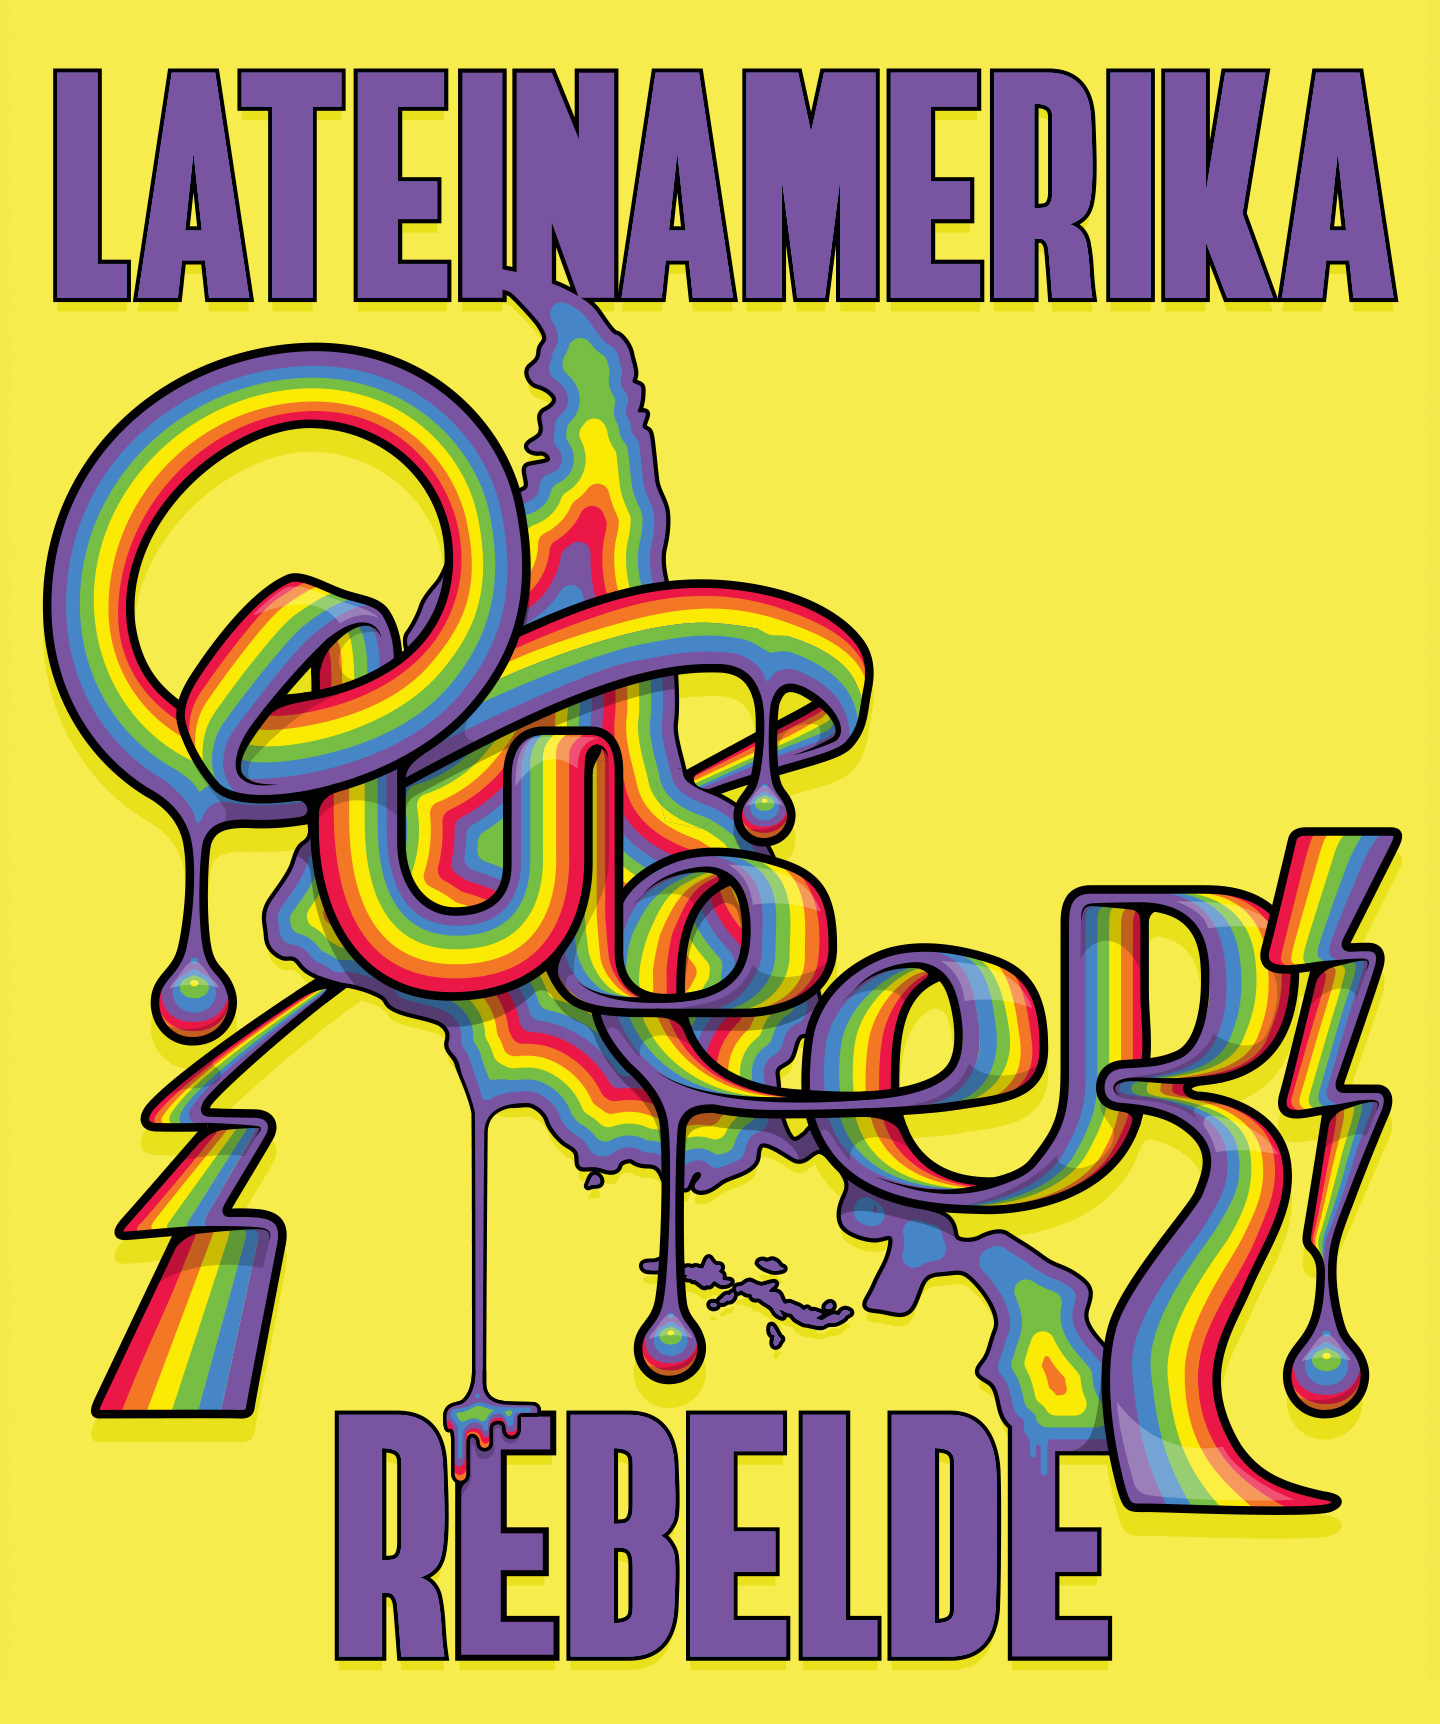 illustration_andre_levy_zhion_vector_pop_queer_type_rainbow_latin_america_dripping_rebelde_1.jpg